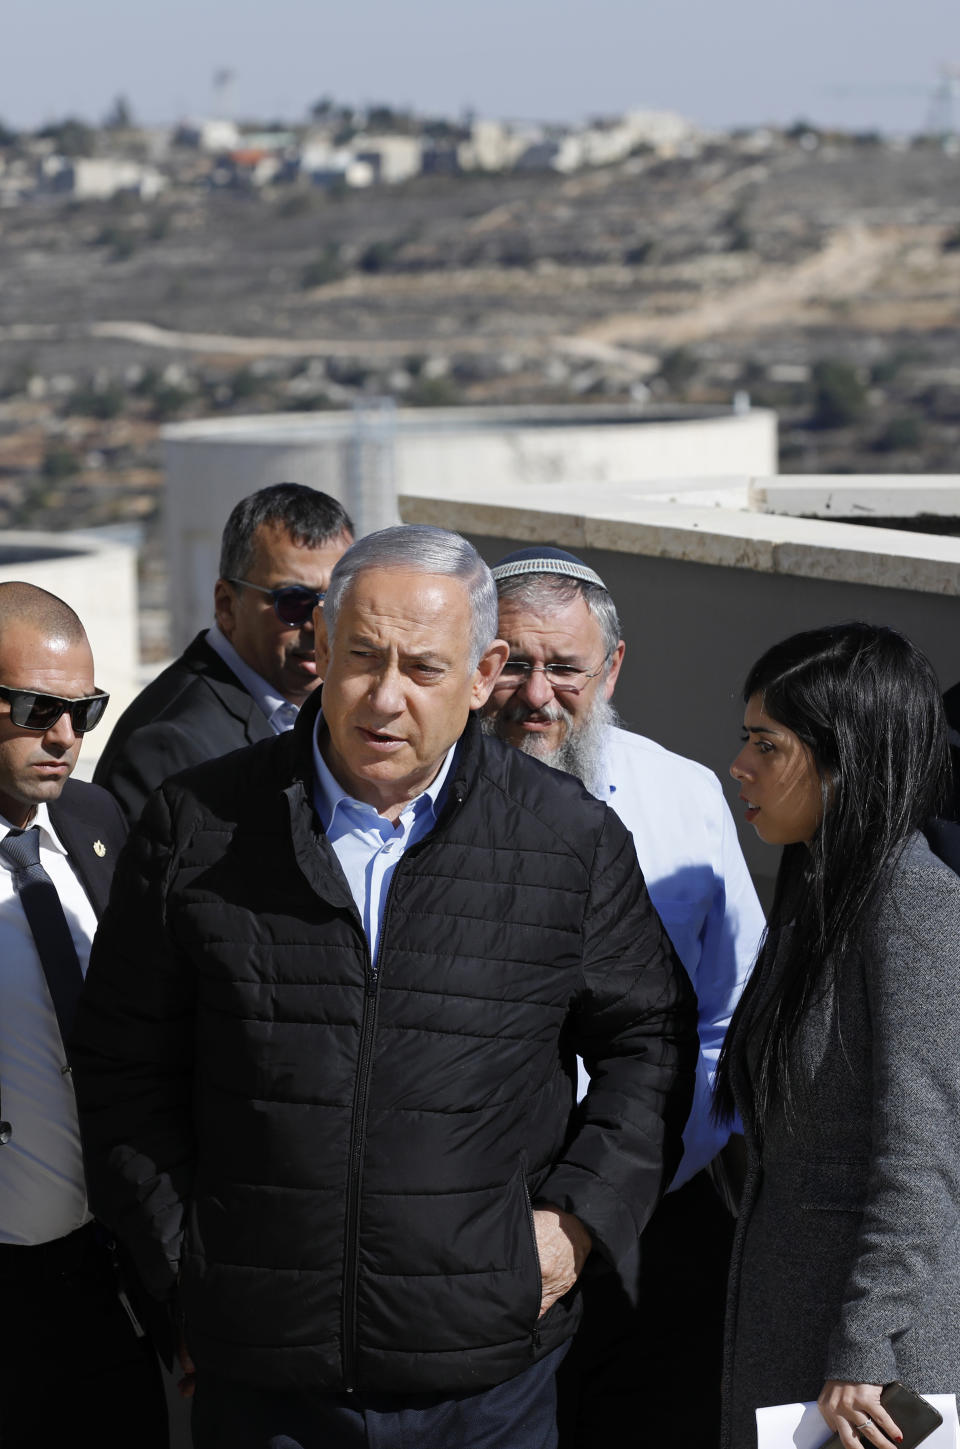 Israeli Prime Minister Benjamin Netanyahu, center, and heads of Israeli settlement authorities tour the Alon Shvut settlement, in the Gush Etzion block, in the occupied the West Bank, Tuesday, Nov. 19, 2019. Netanyahu traveled to the West Bank to celebrate the U.S.’s announcement that it does not consider Israeli settlements to be a violation of international law. (Menahem Kahana/Pool via AP)